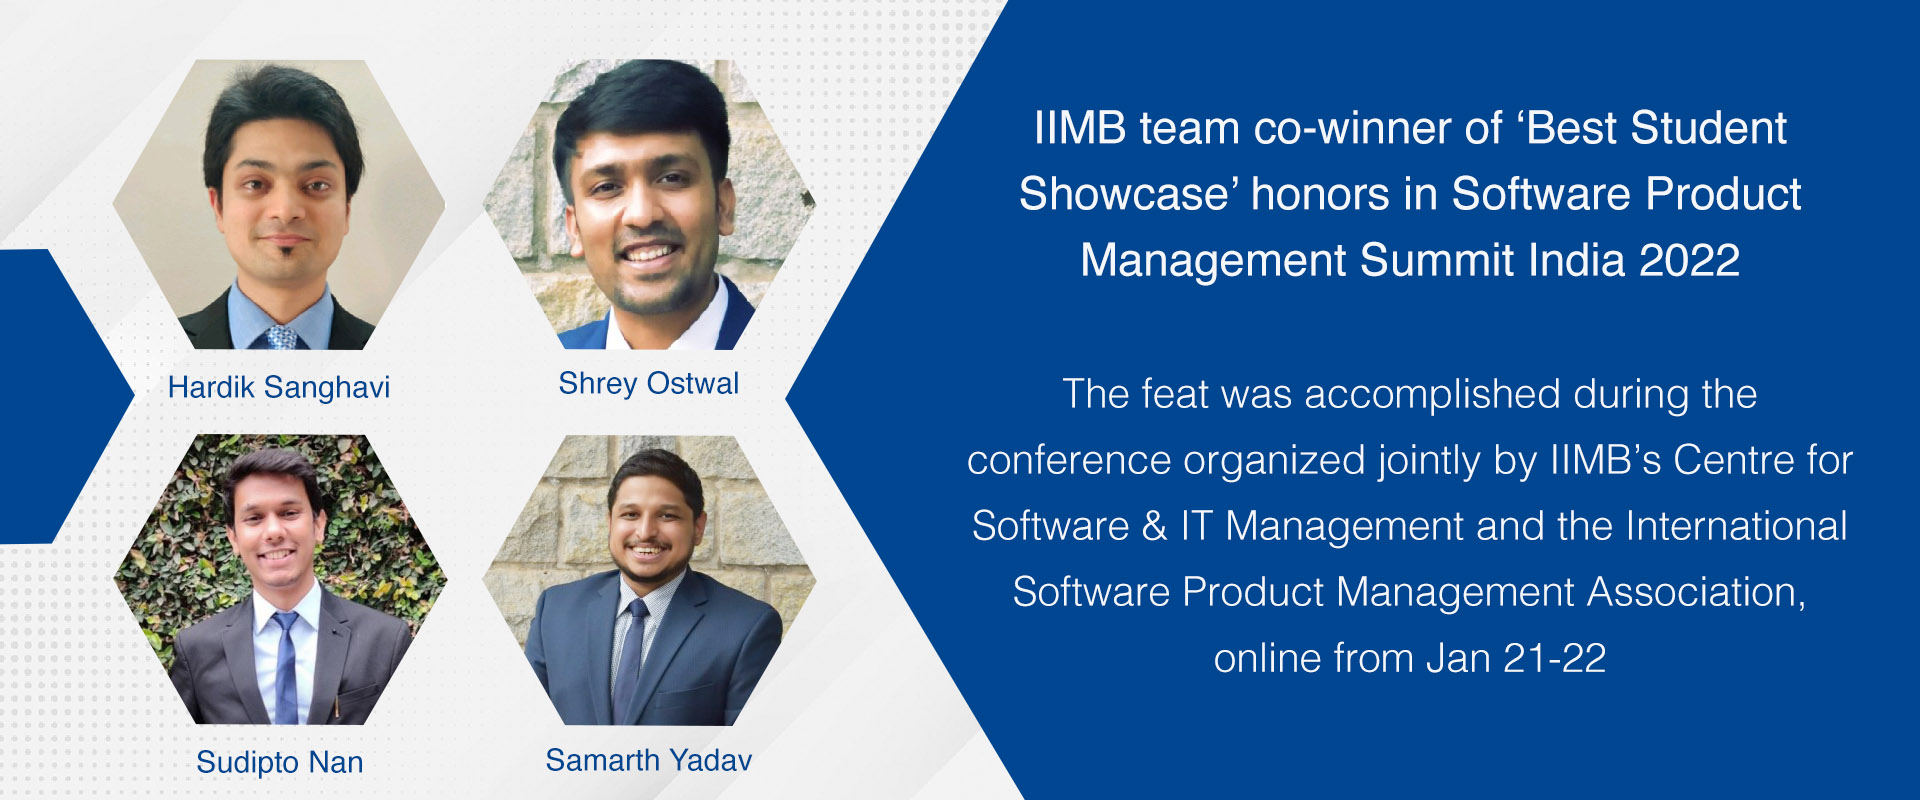 IIMB team co-winner of ‘Best Student Showcase’ honors in Software Product Management Summit India 2022